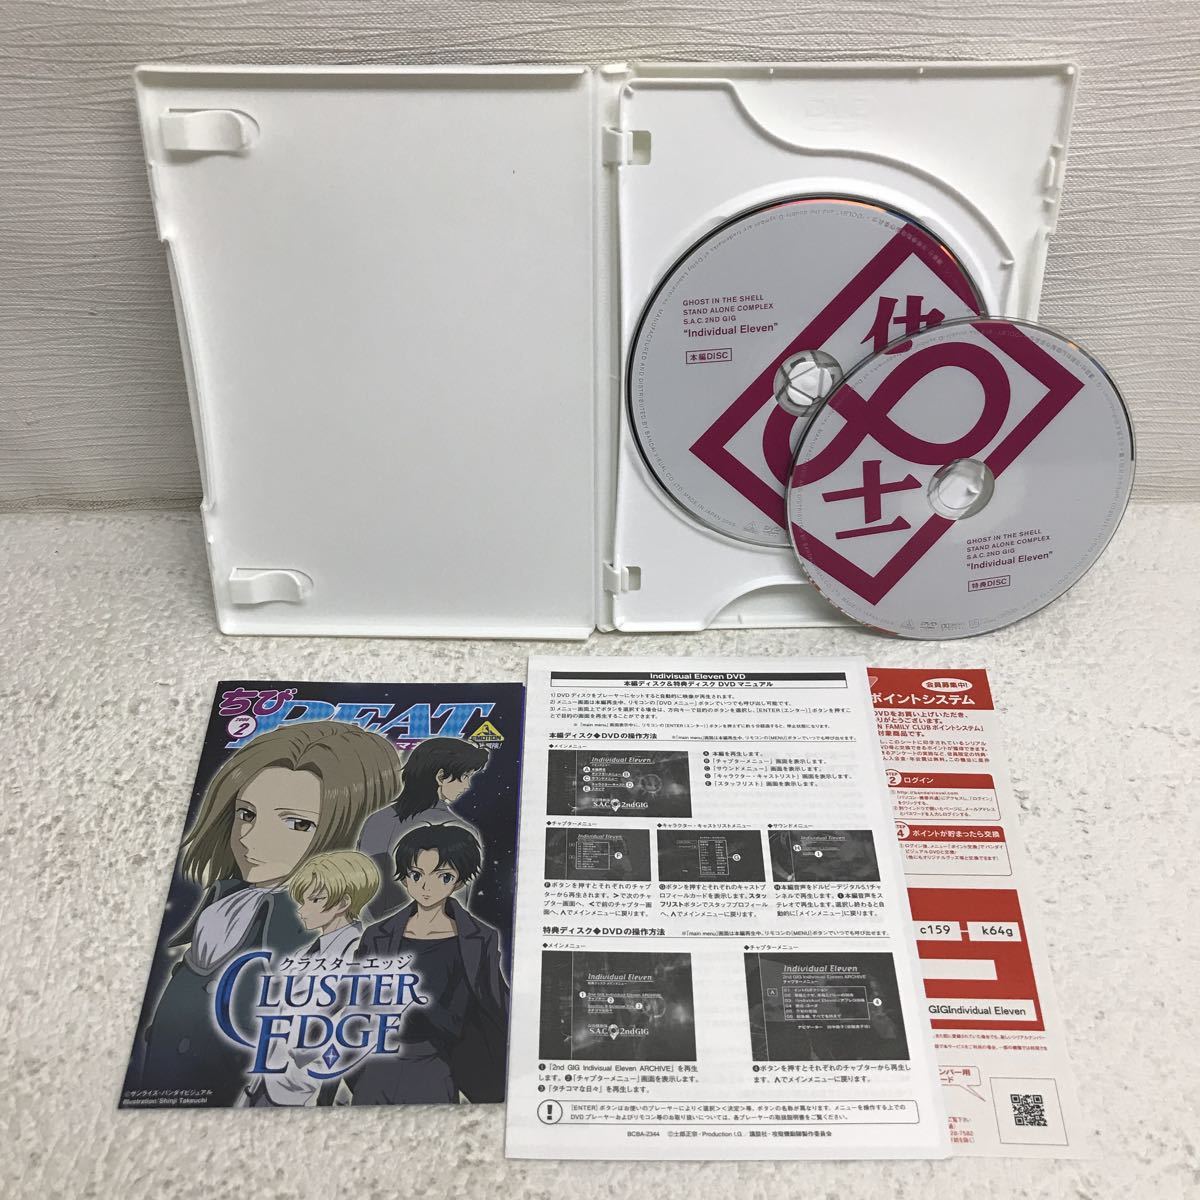 PY0601B 攻殻機動隊 STAND ALONE COMPLEX Solid State Society/The Laughing Man/Individual Eleven/DVD 3本セット セル版 邦画 アニメ _画像9